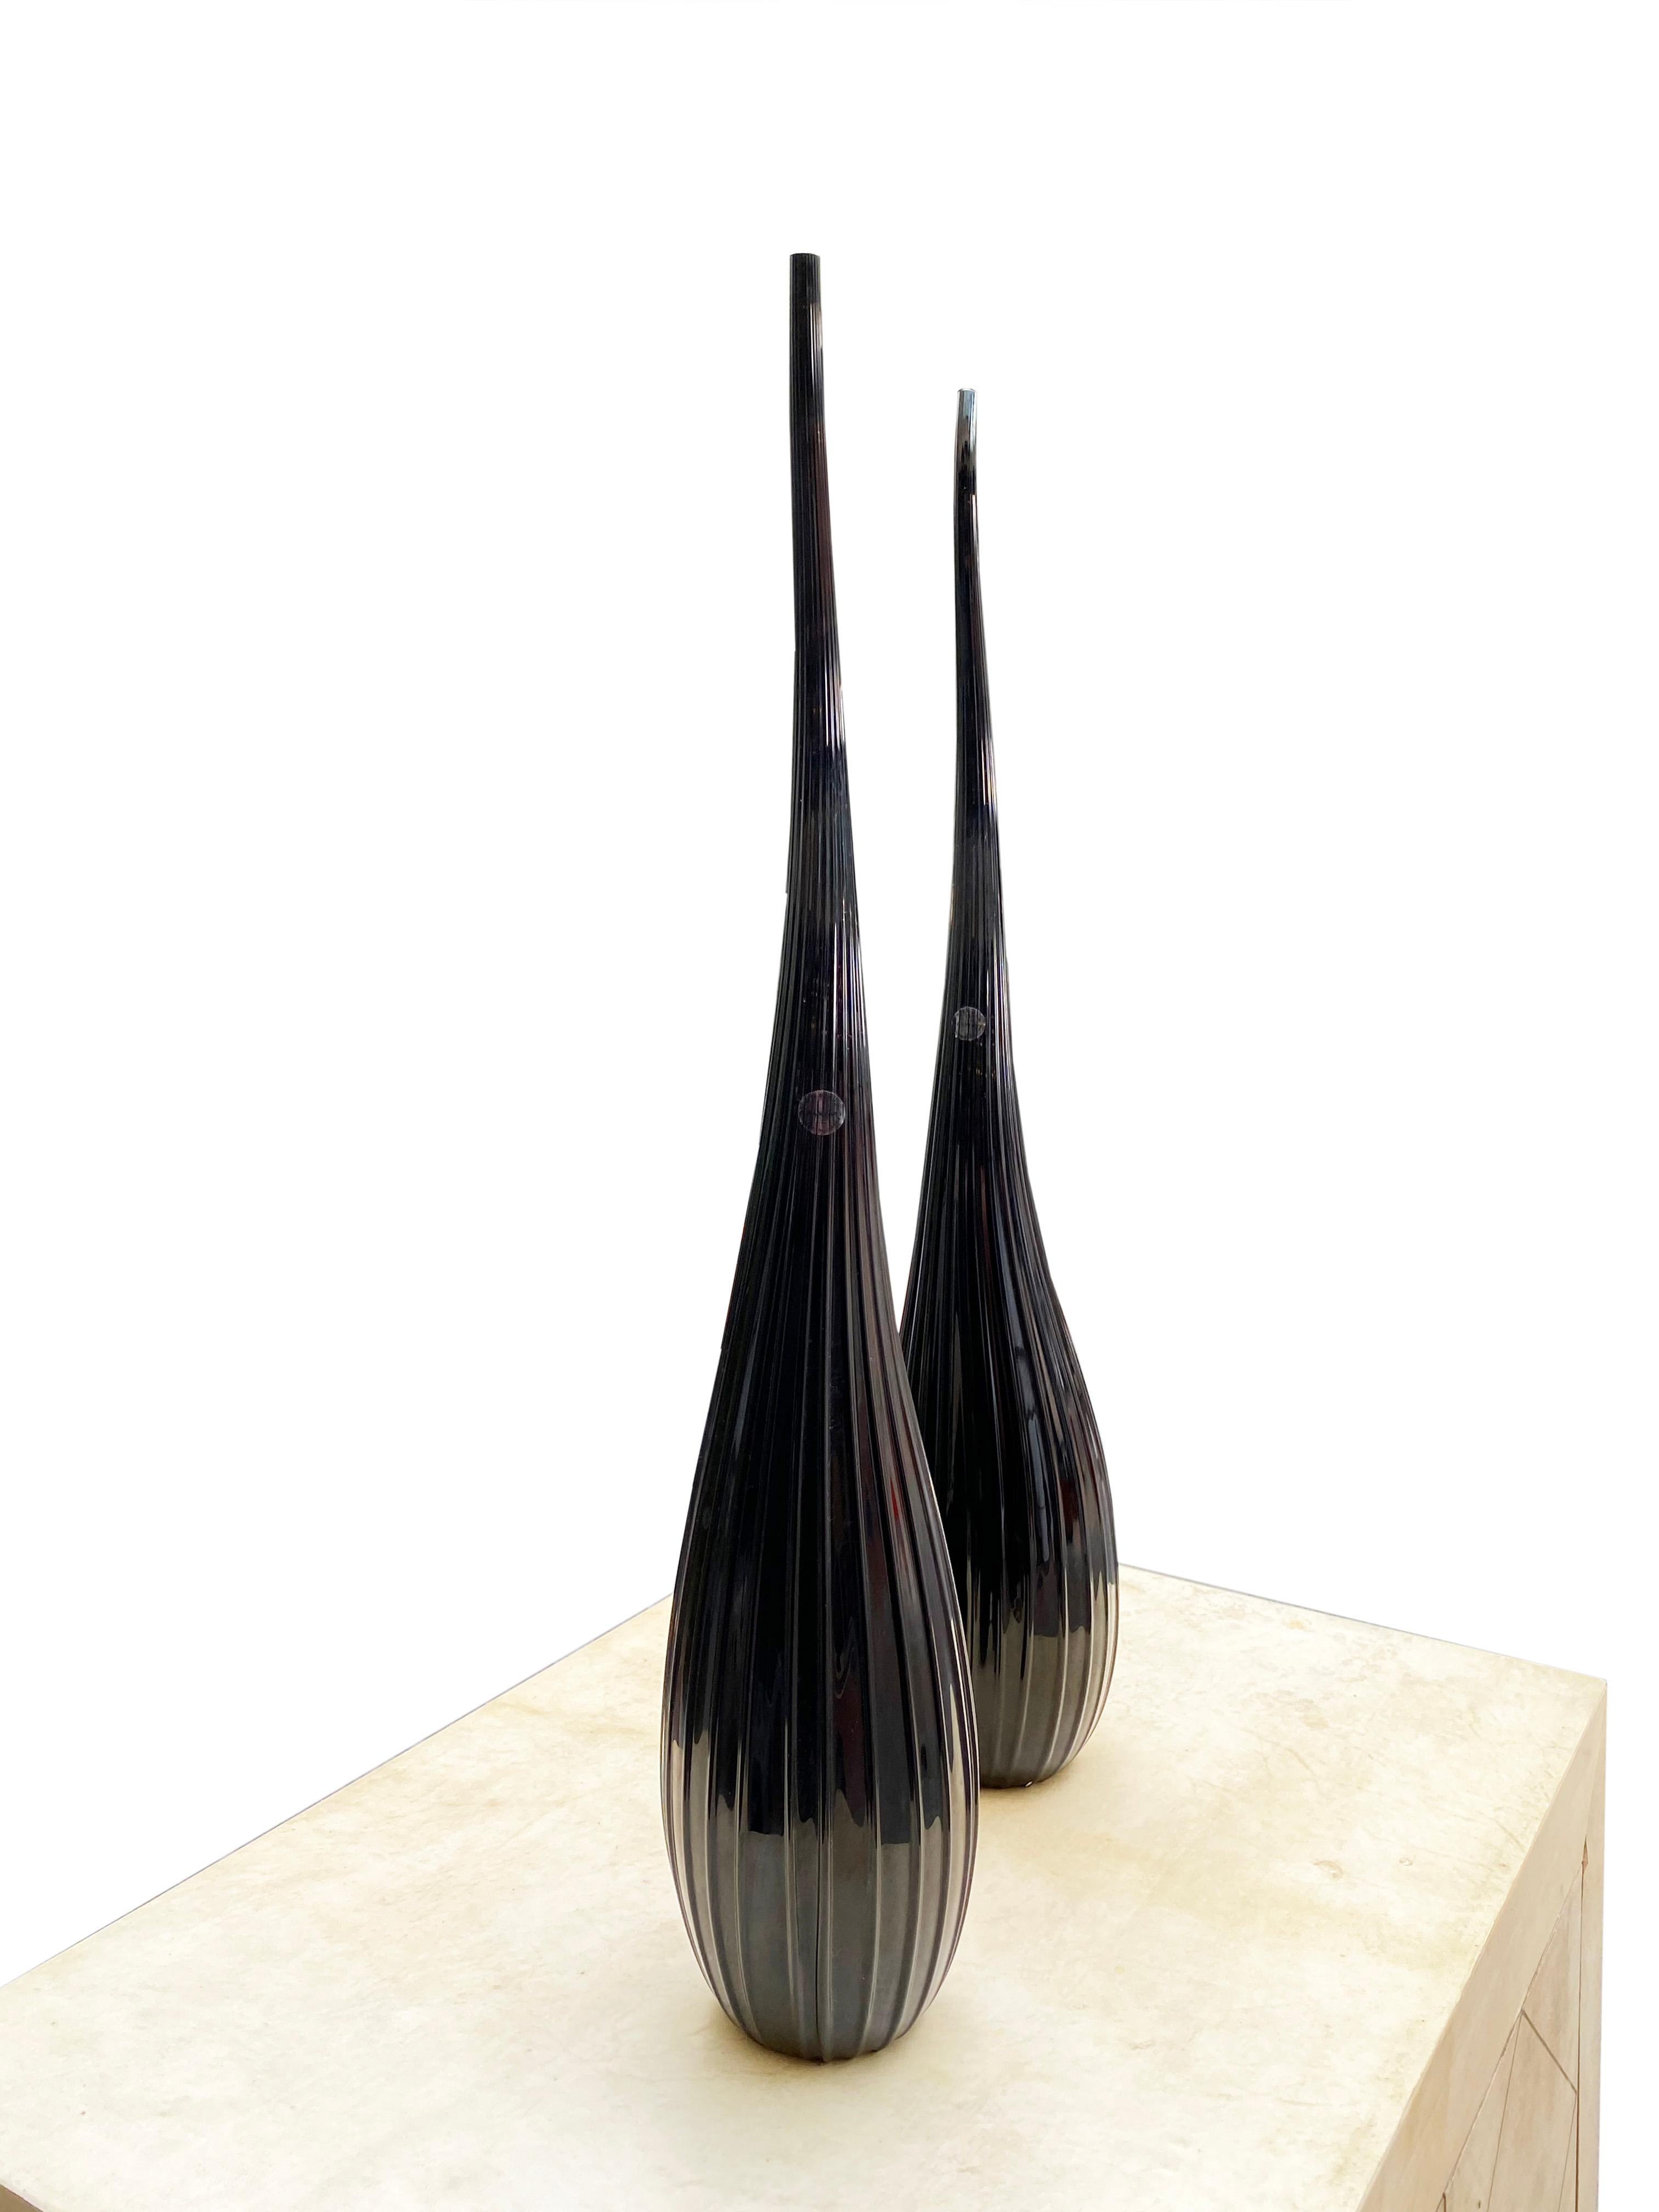 Salviati
By Renzo Stellon
Aria model
2 vases soliflore model aria
In black Murano glass
Piriform in shape with a long, turbulent neck decorated with fine ribs
55 cms high
Signed and dated 2009
Stock items
890 Euros

Salviati.
Glass